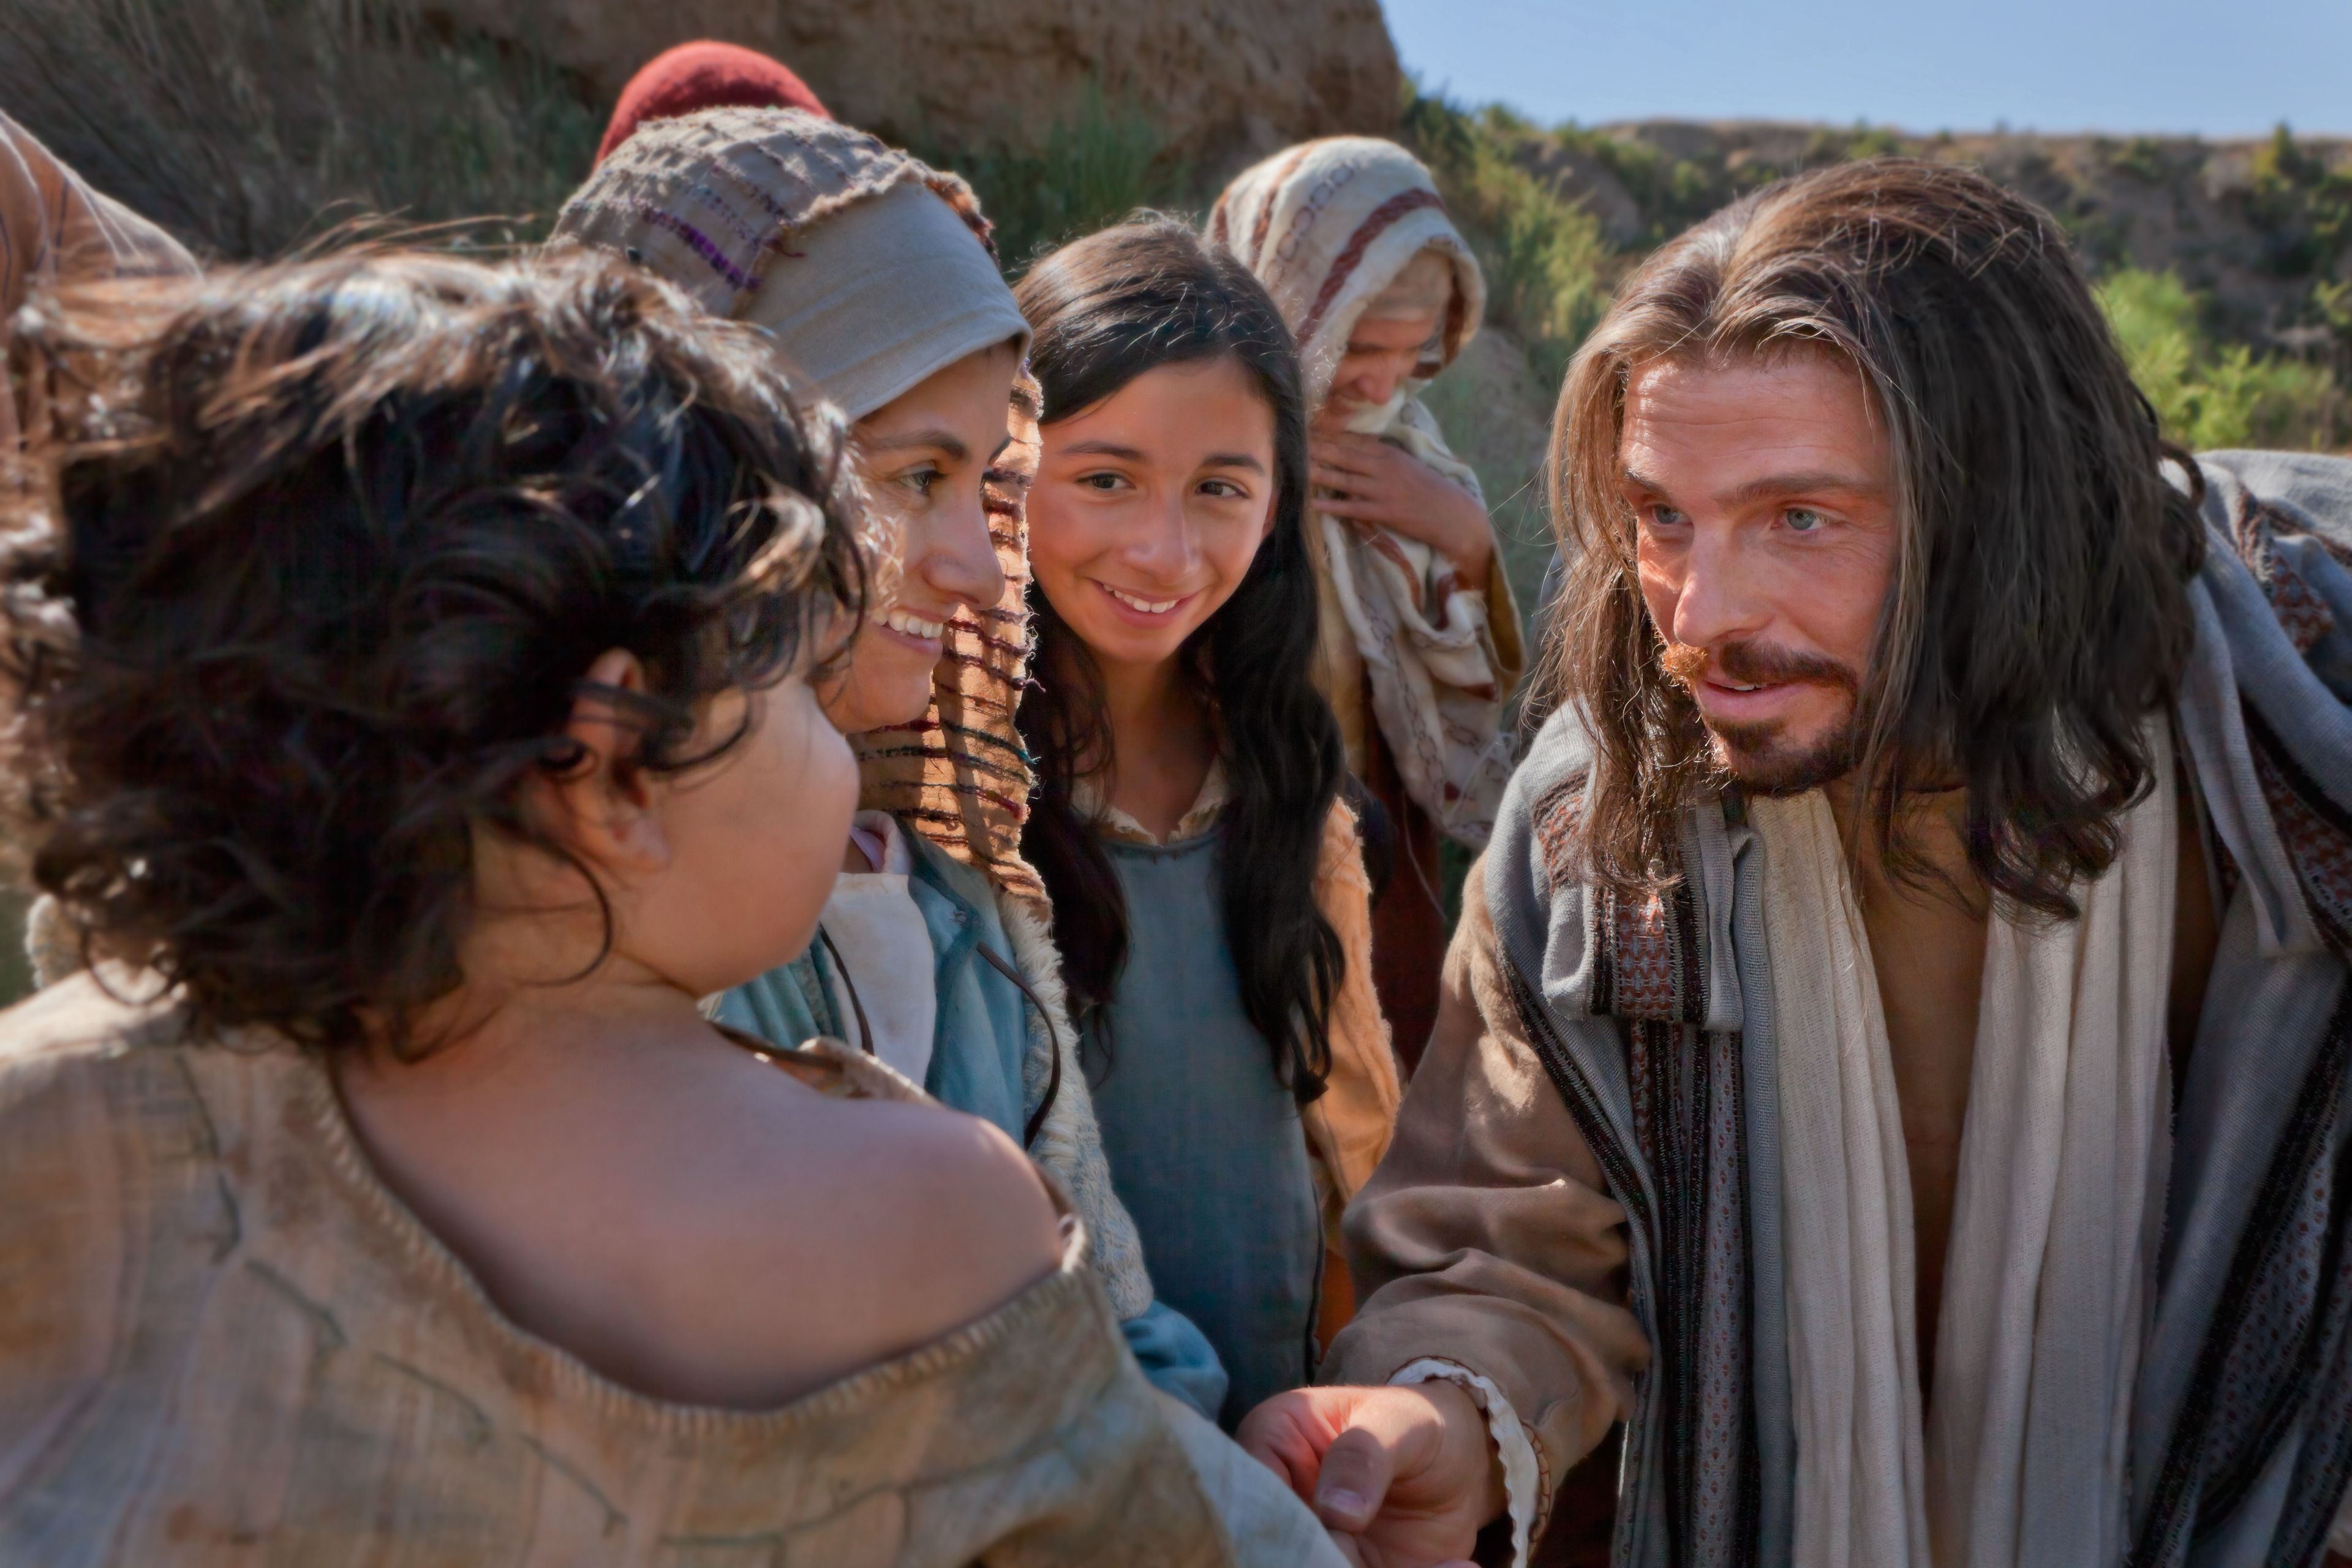 Jesus talking with a child and the child’s mother.